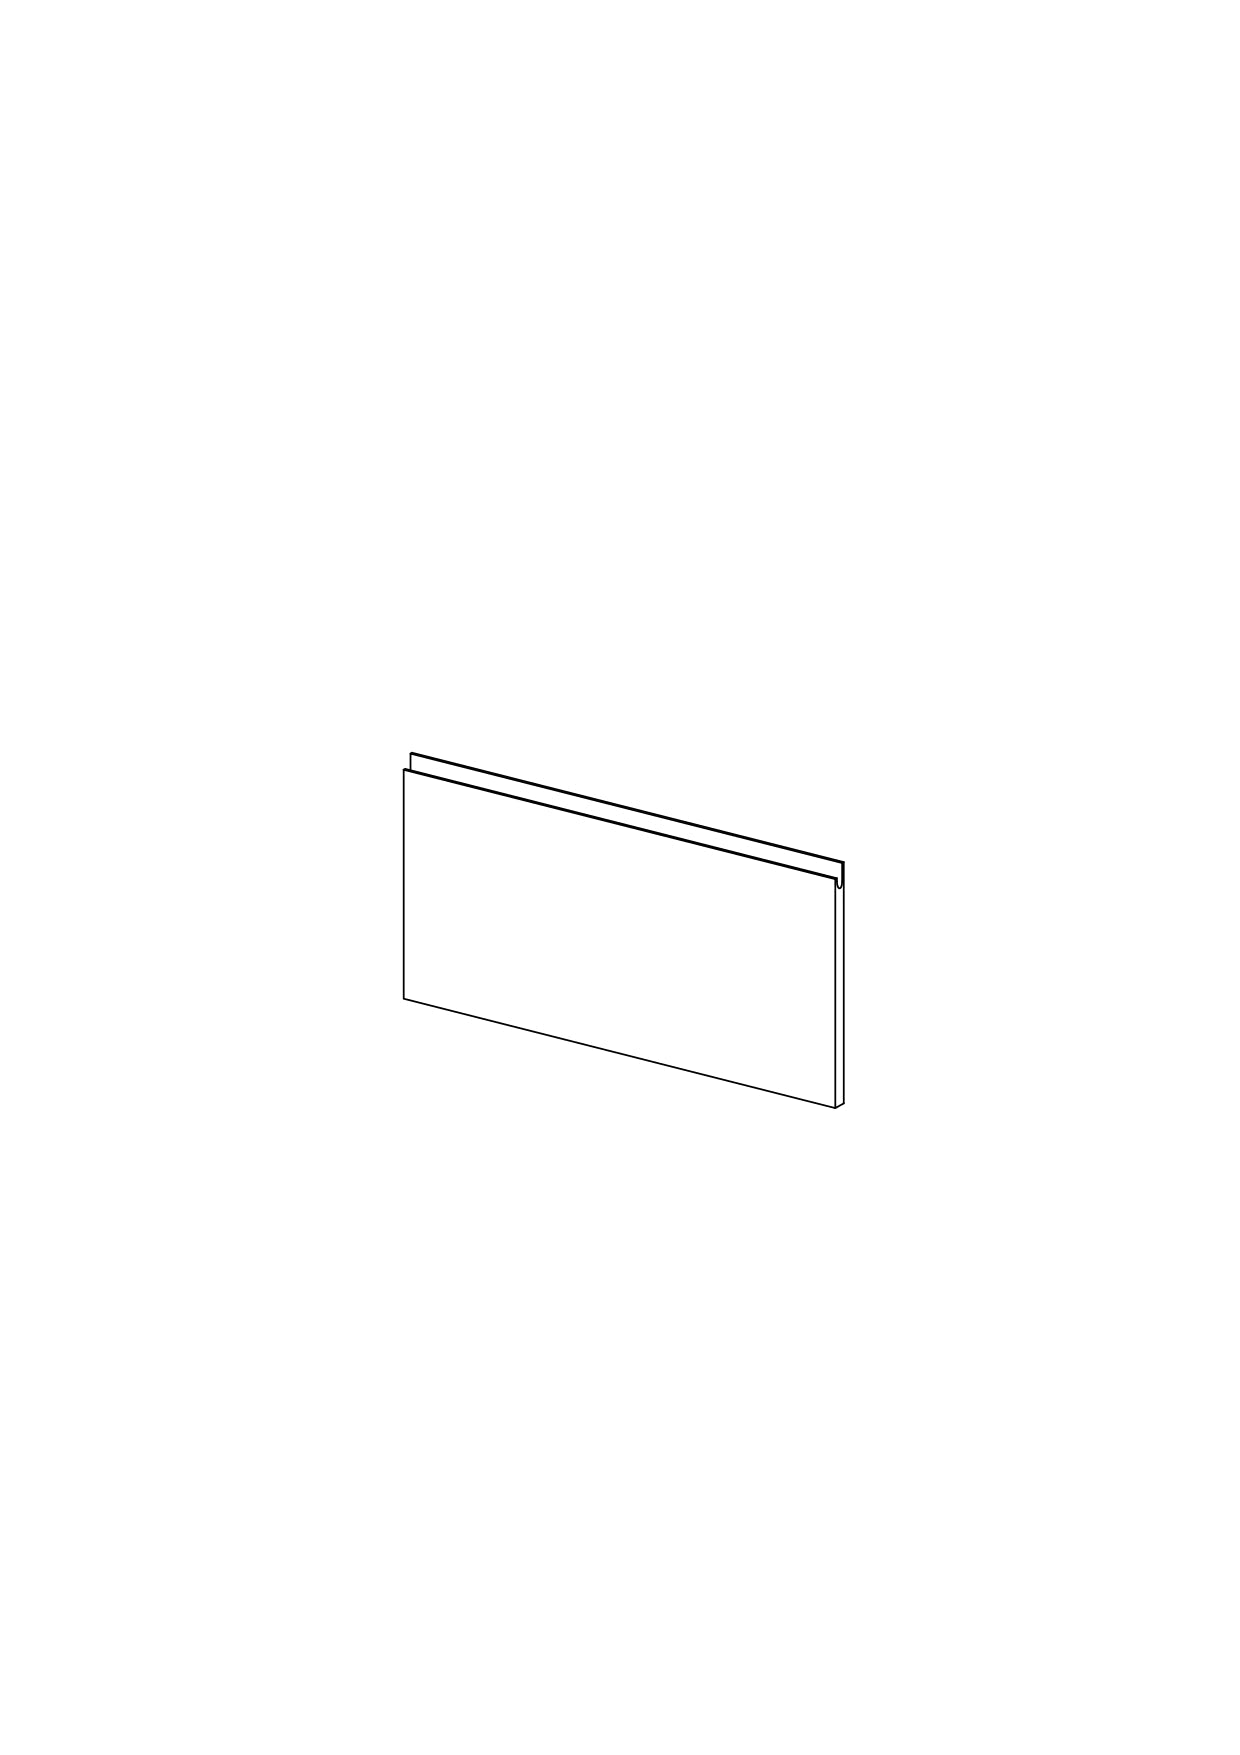 40x20 Drawer - Finger Pull - Unpainted (Raw) - METOD